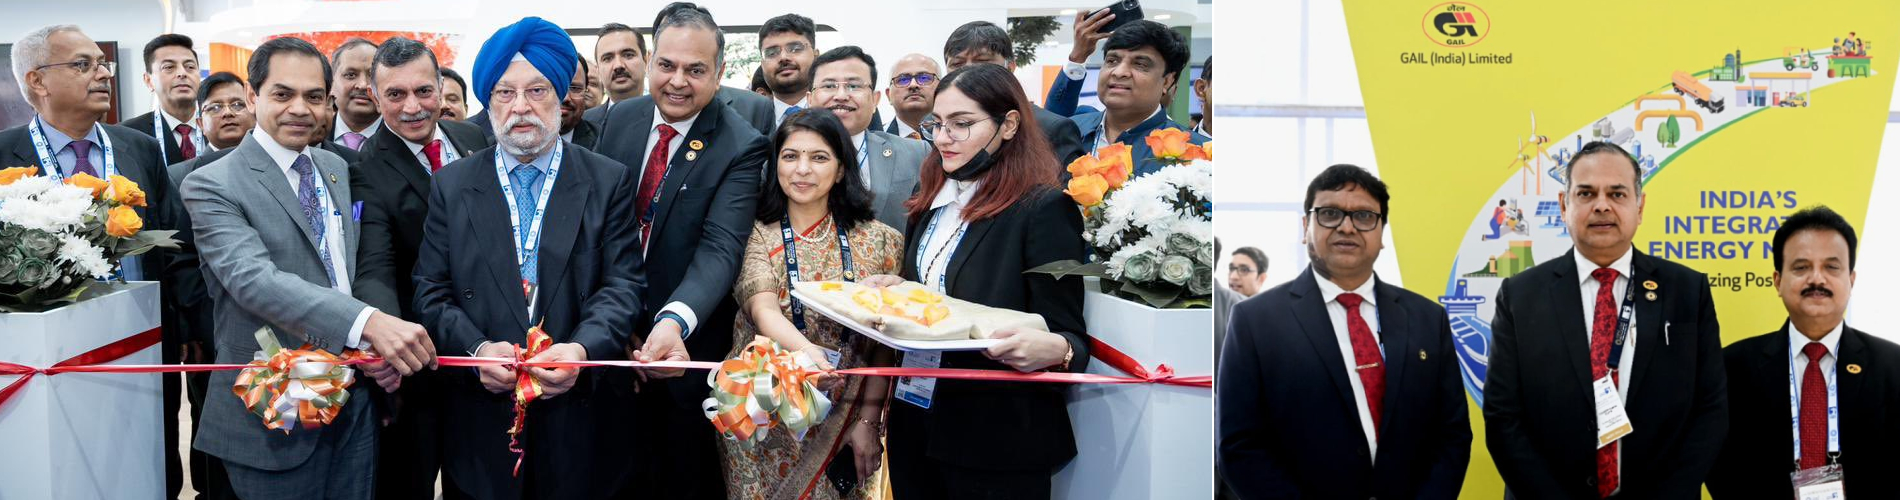 Hon'ble Minister of Petroleum and Natural Gas inaugurated the India Pavilion at #ADIPEC in Abu Dhabi. GAIL was part of the India Pavilion